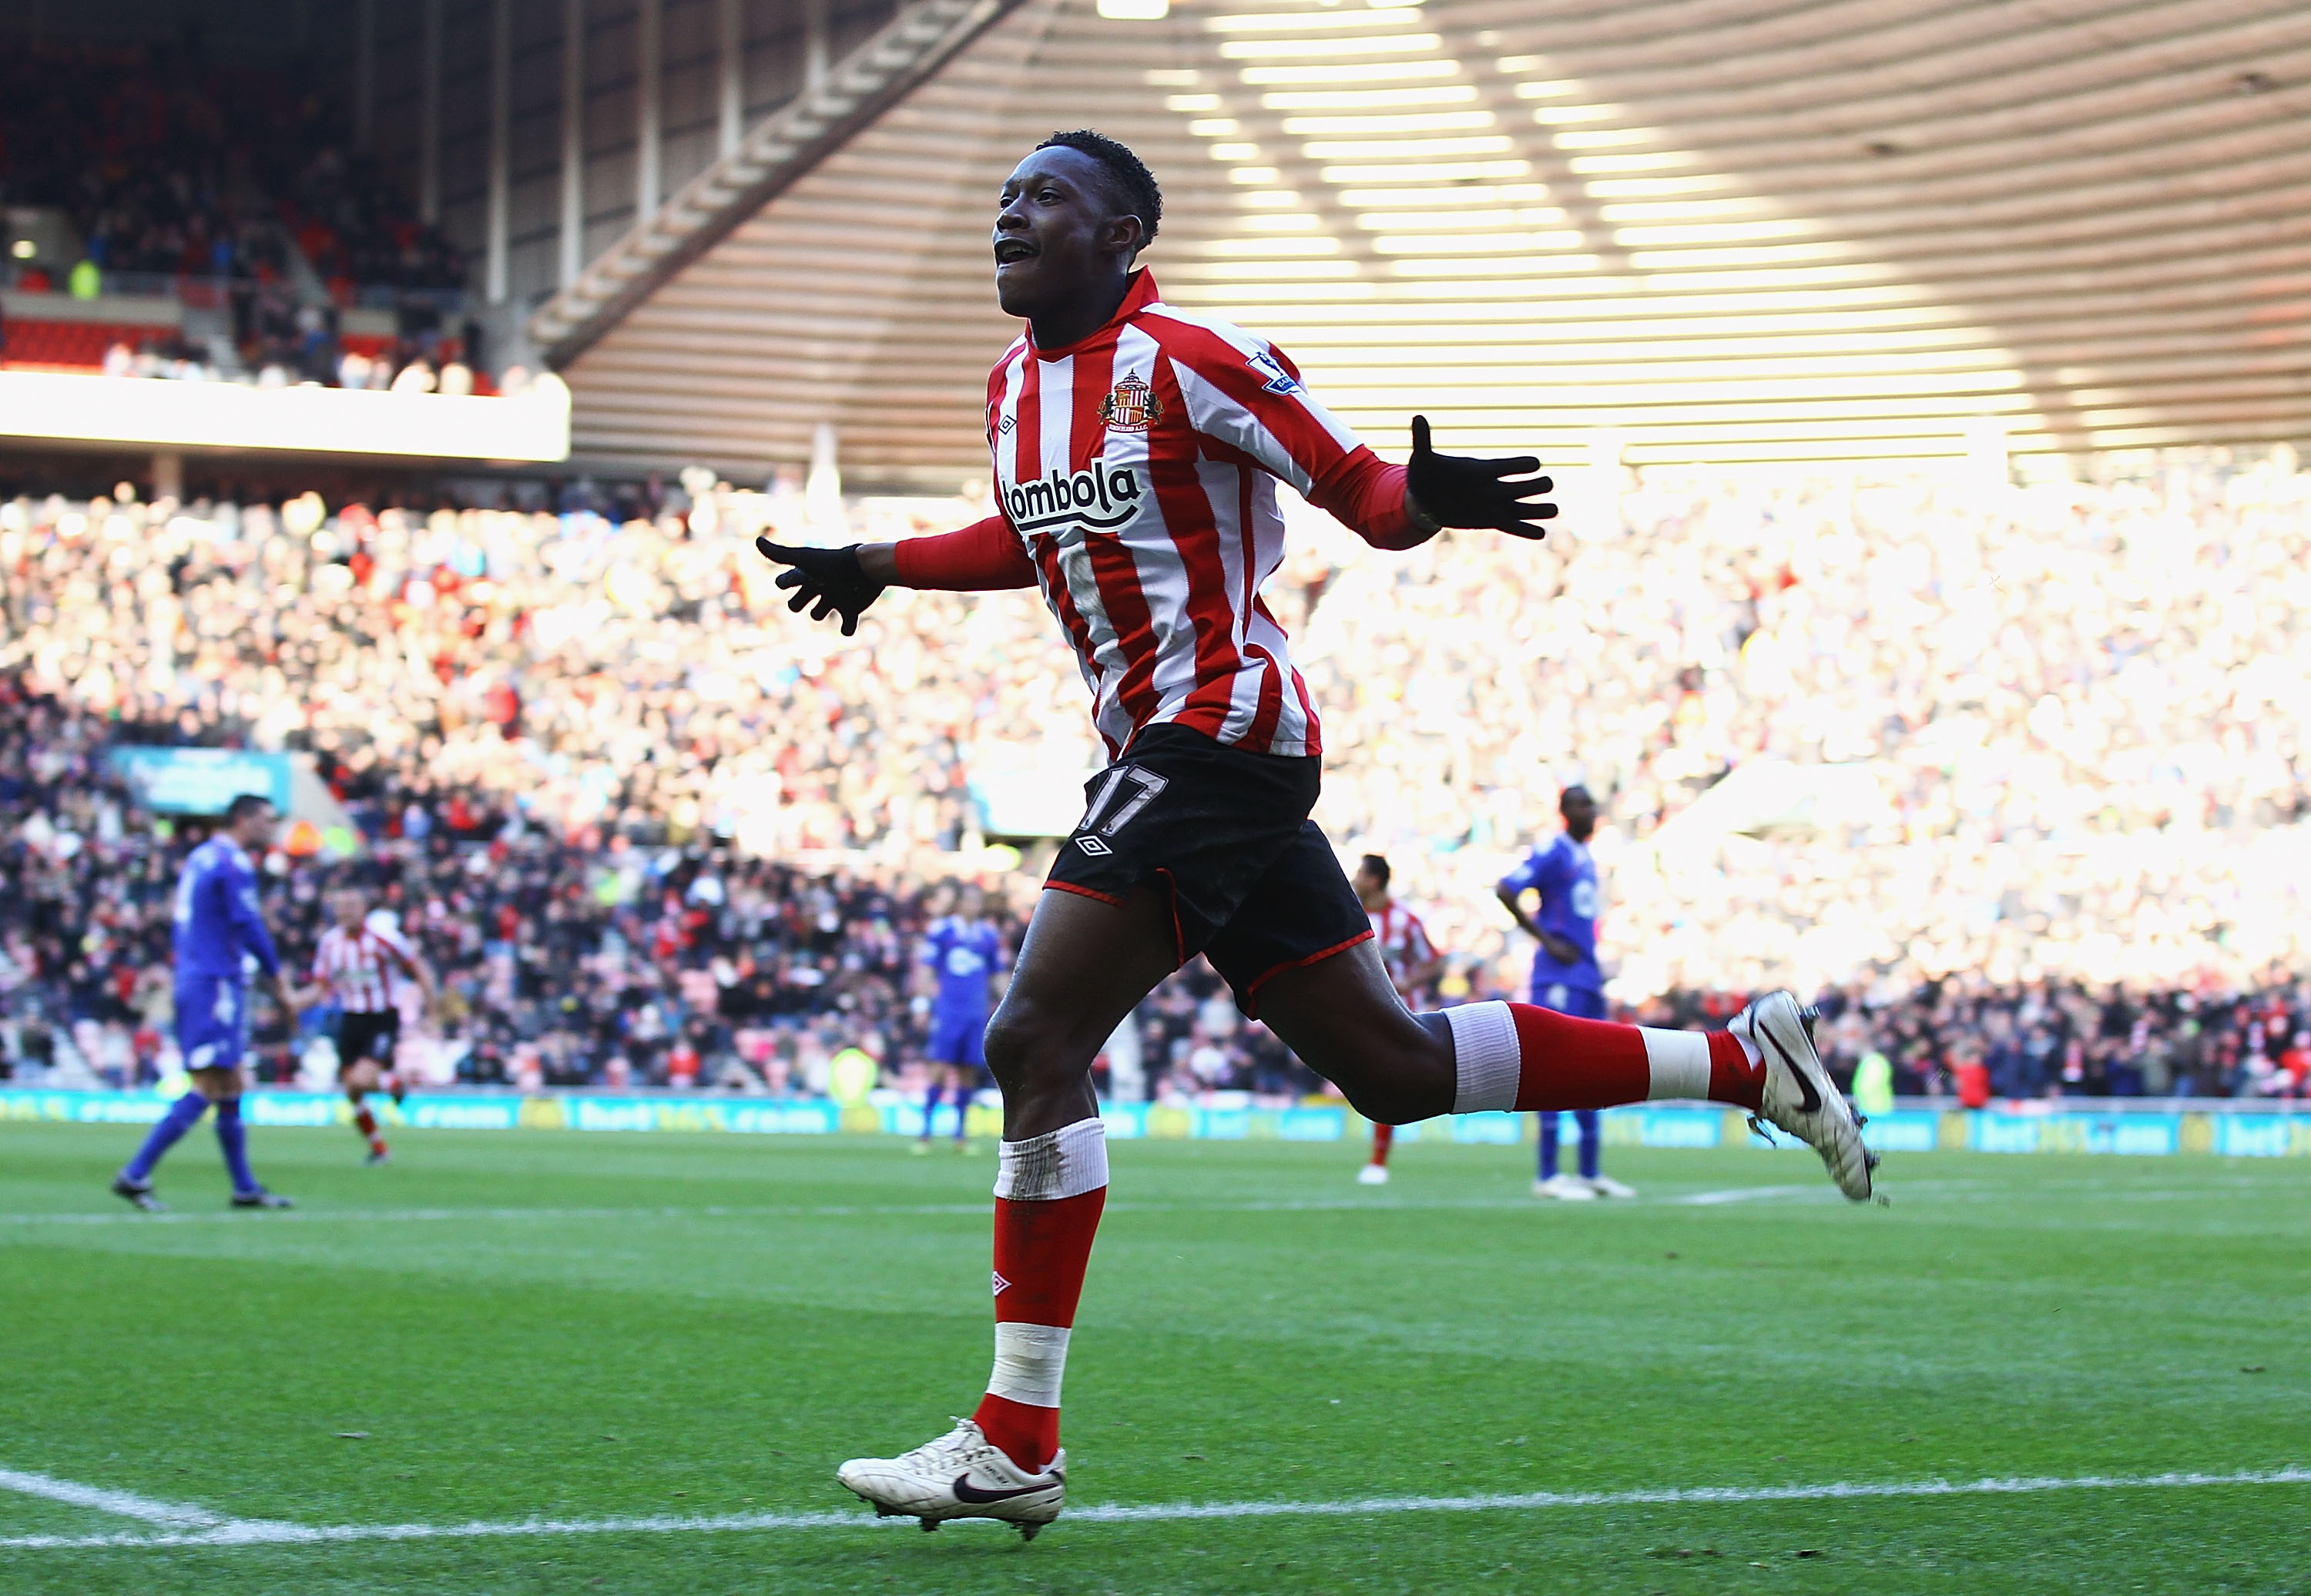 SUNDERLAND, ENGLAND - DECEMBER 18:  Danny Wellbeck of Sunderland celebrates his goal during the Barclays Premier League match between Sunderland and Bolton Wanderers at Stadium of Light on December 18, 2010 in Sunderland, England.  (Photo by Matthew Lewis